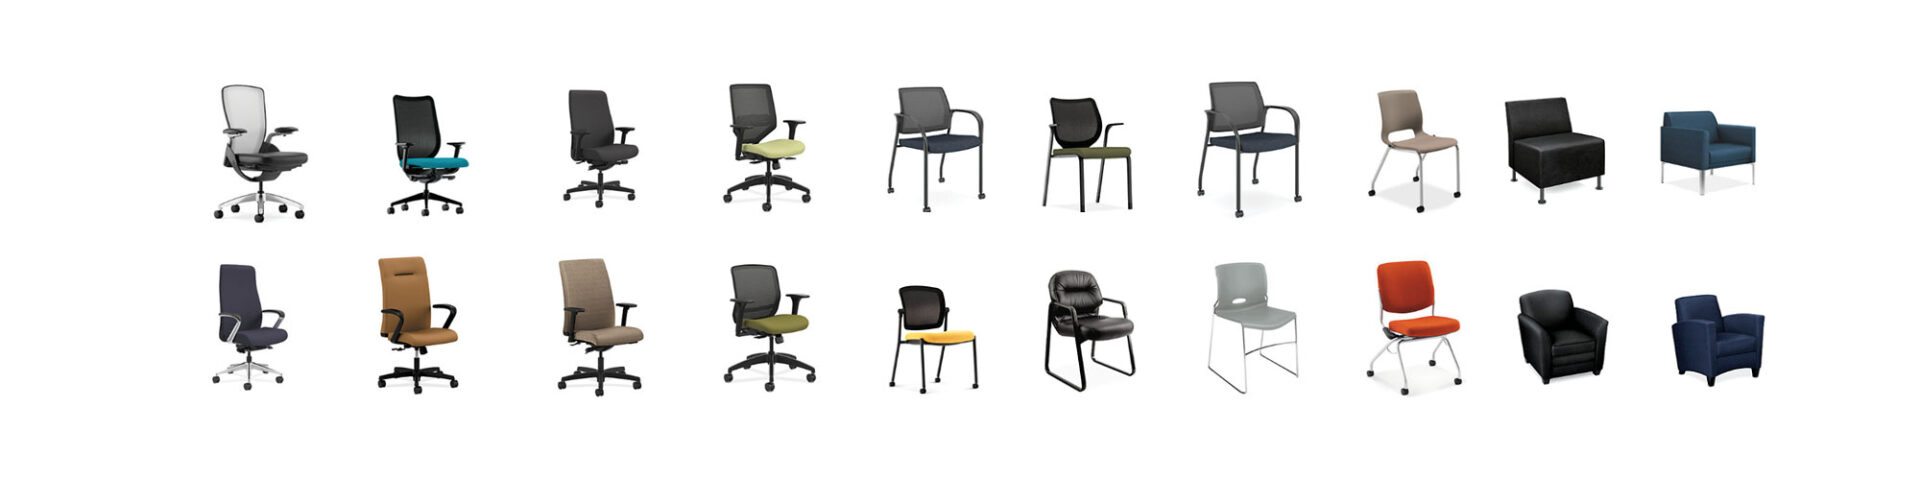 A variety of chairs